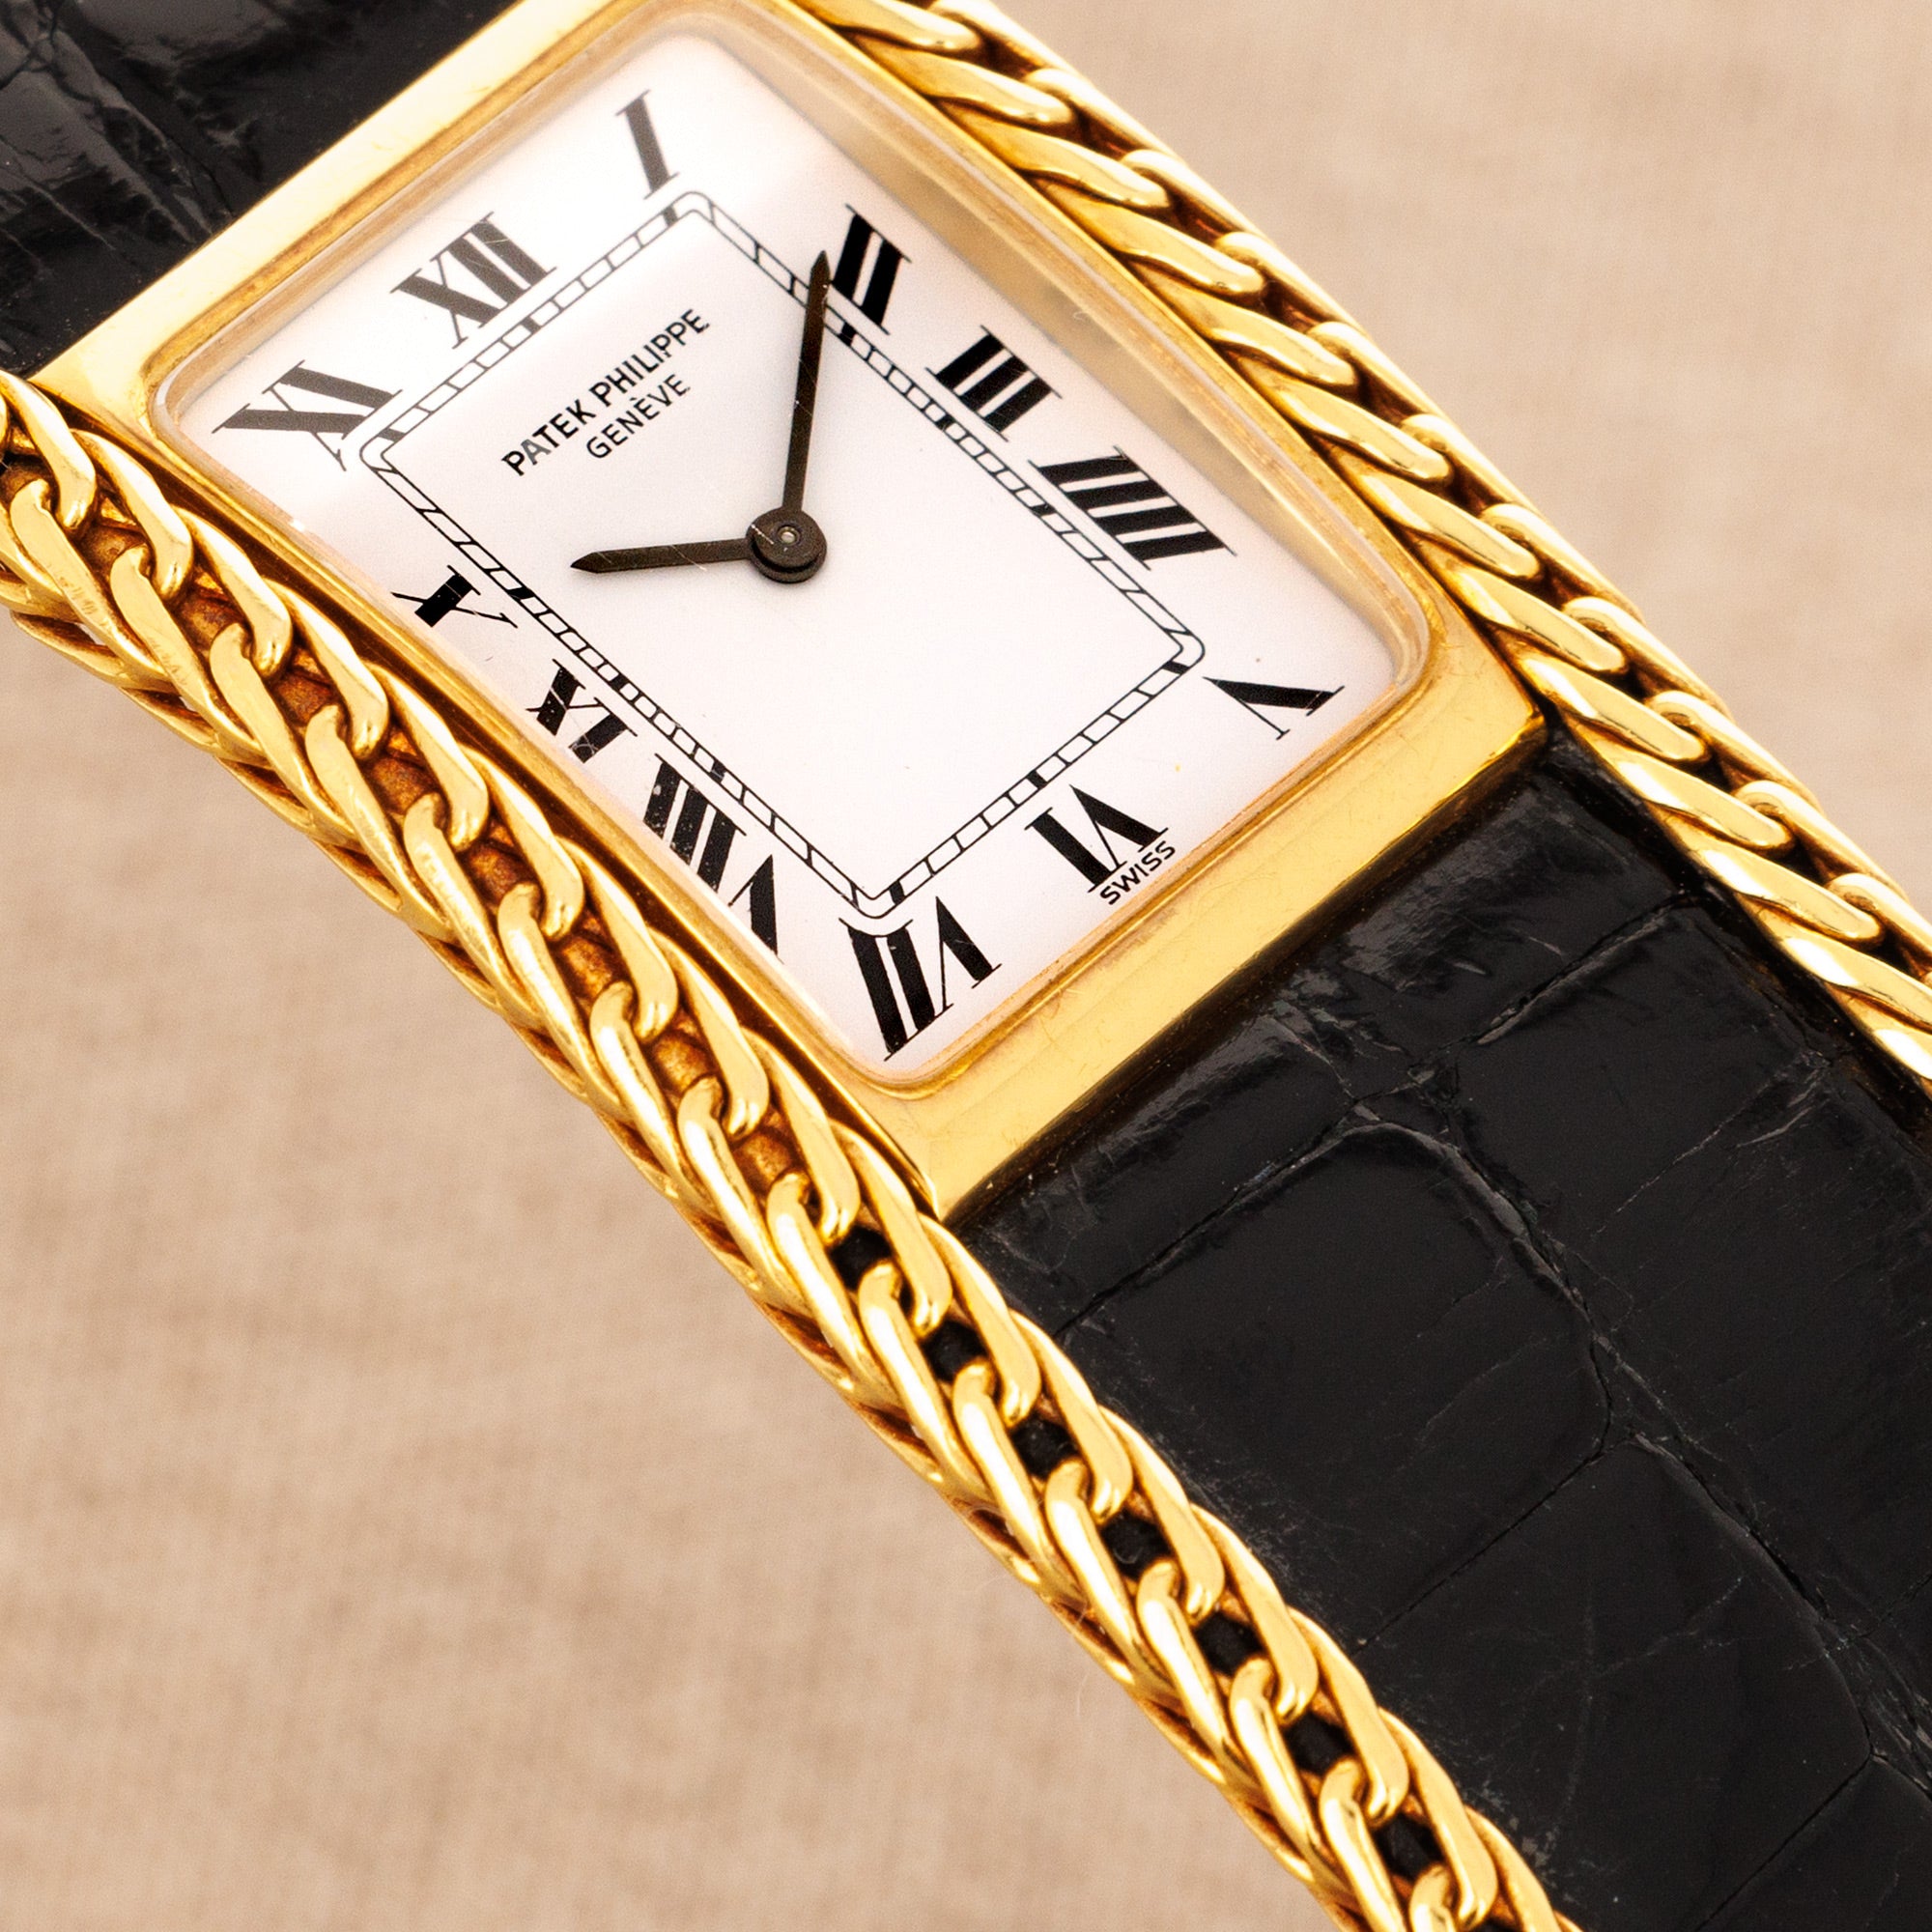 Patek Philippe - Patek Philippe Yellow Gold and Leather Bracelet Watch Ref. 4241 - The Keystone Watches